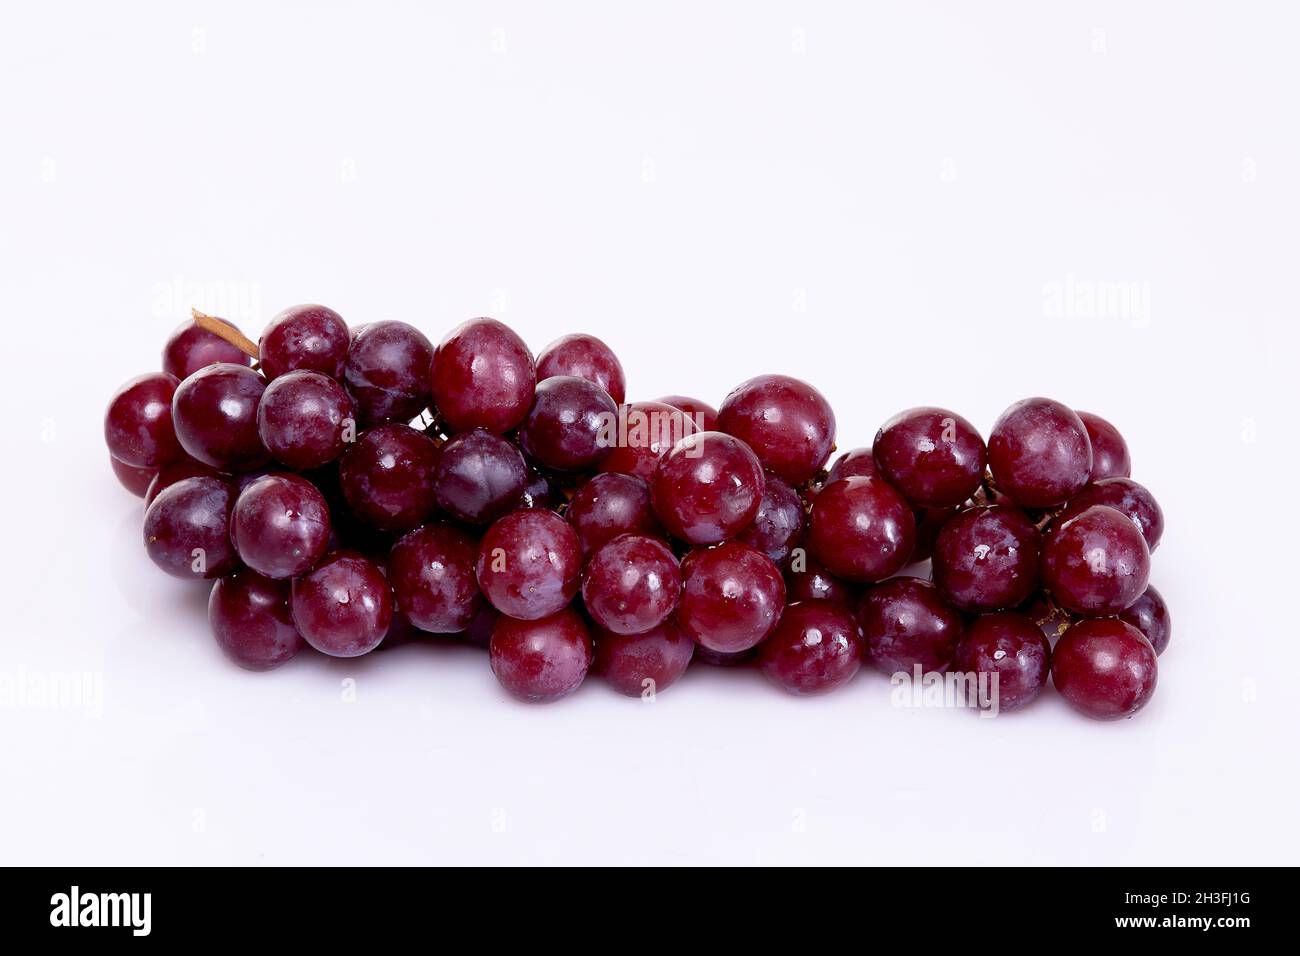 Fruits- The green grapes, red grapes, green apples and red apples Stock Photo